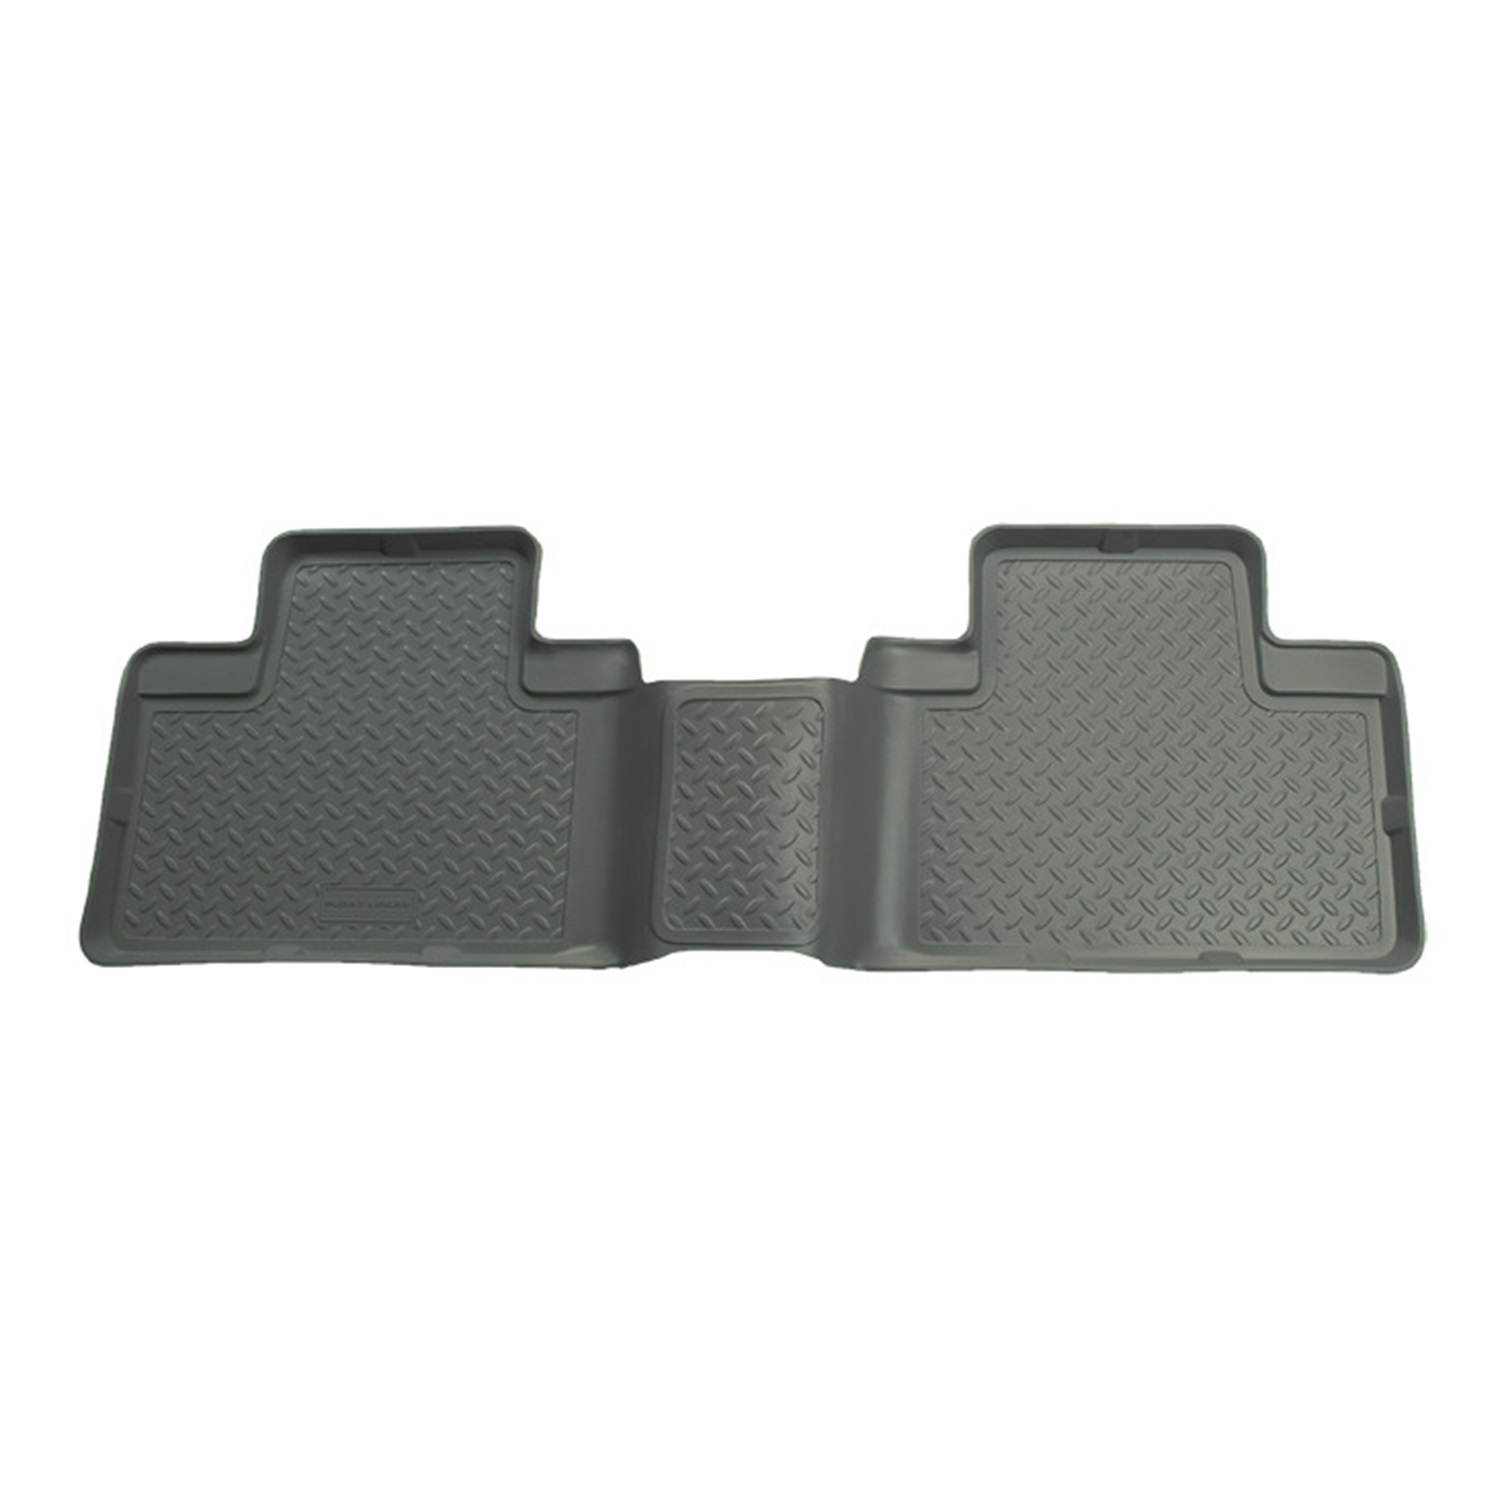 Husky Liners Husky Liners 65512 Classic Style; Floor Liner Fits 04-06 Tundra